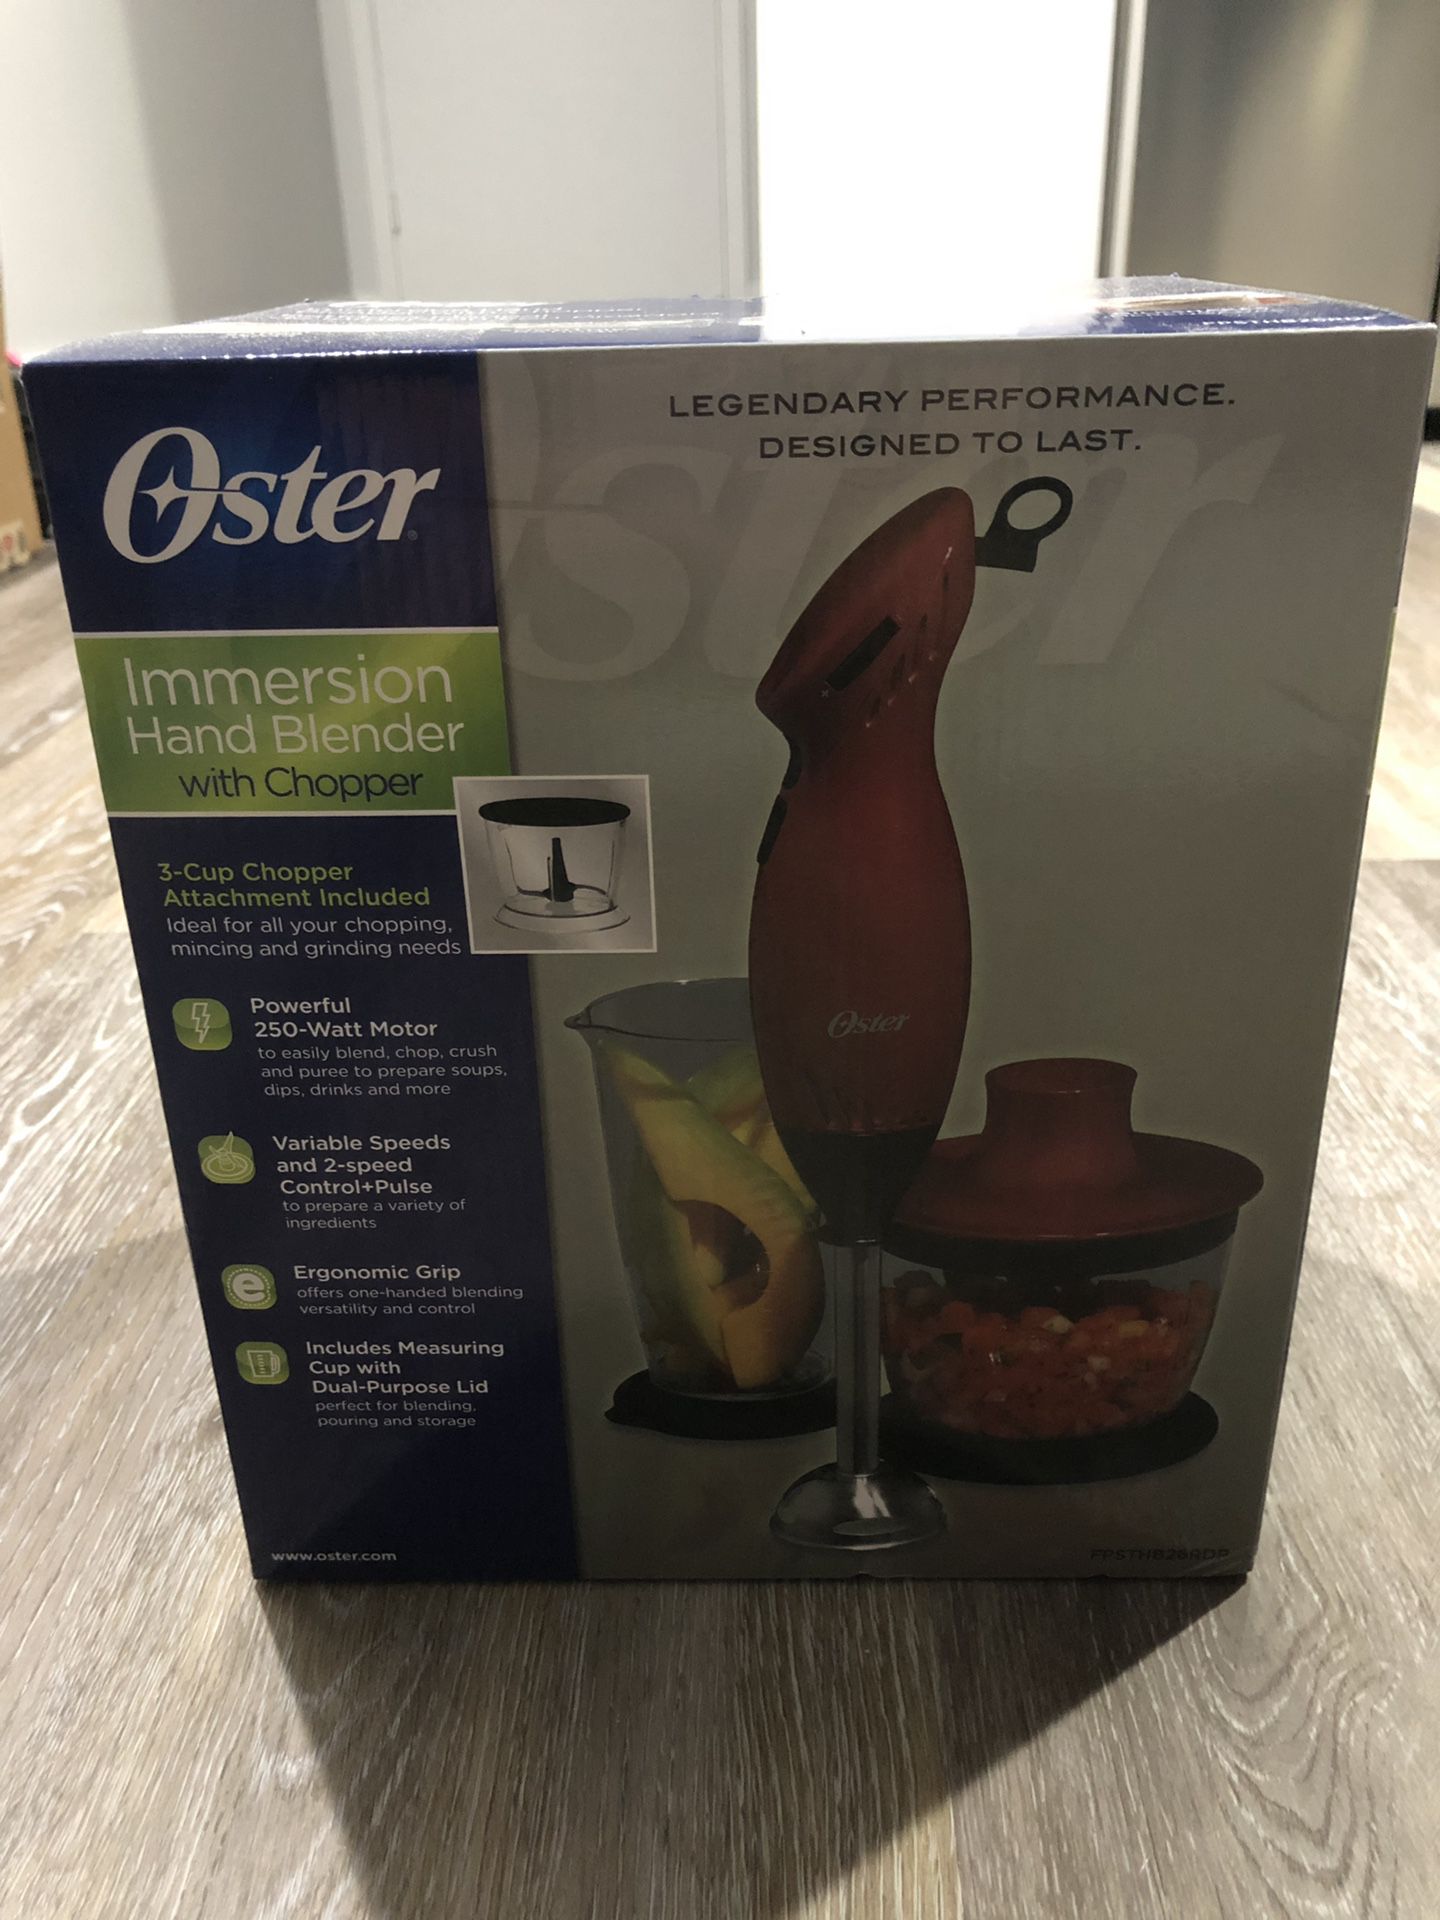 Oster immersion hand blender with chopper